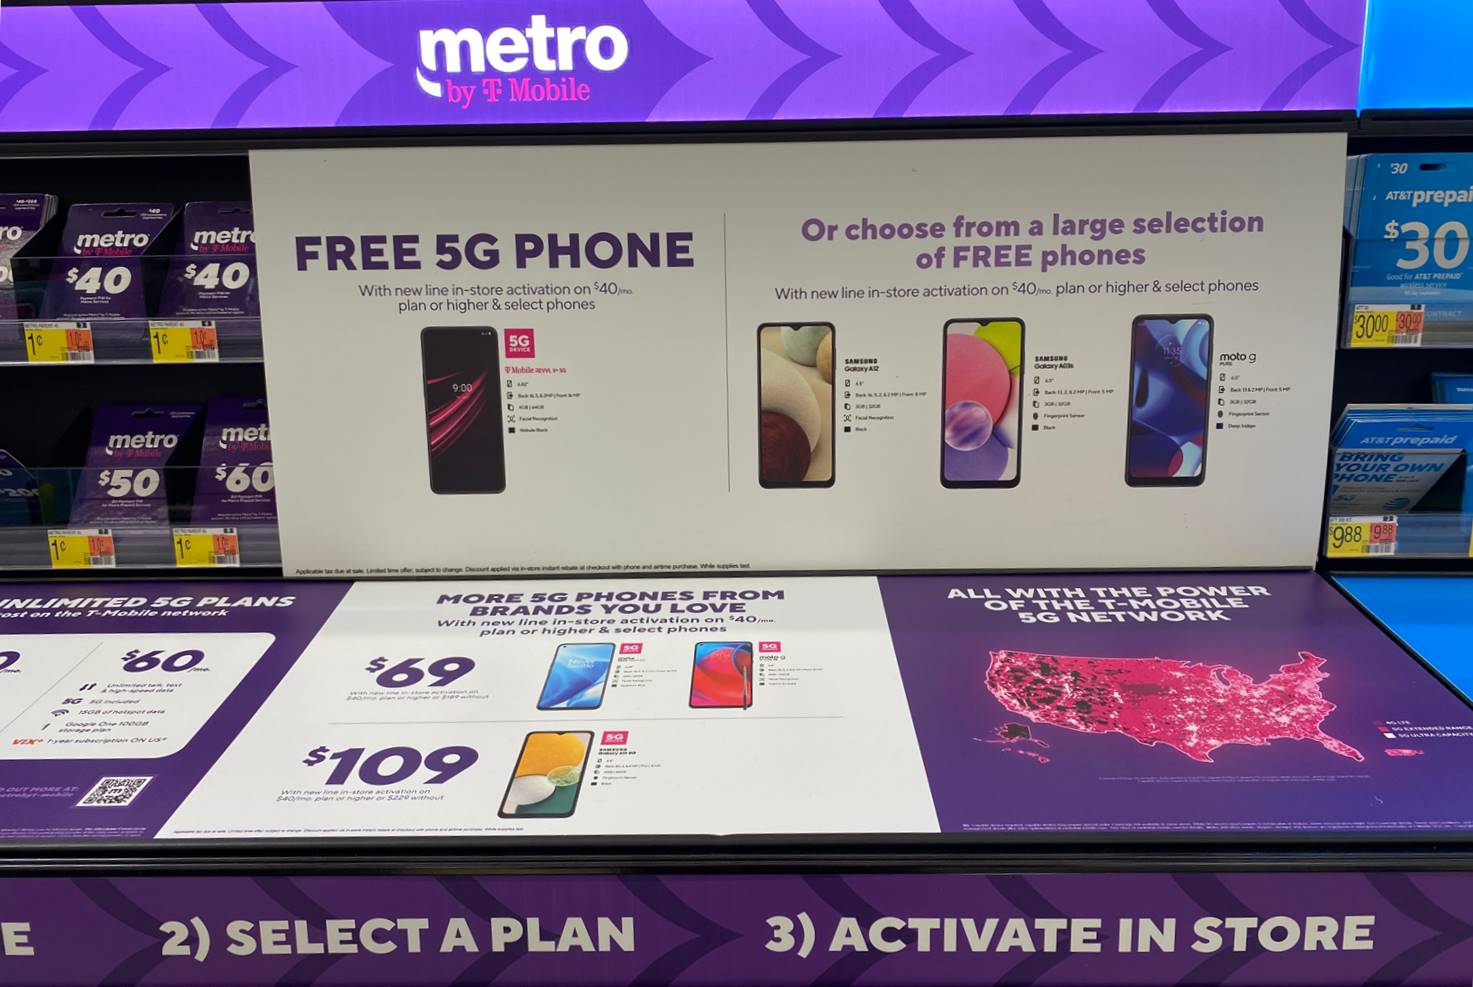 Metro by T-Mobile Has Free Phone Offers At Walmart Photo Via Wave7 Metro by T-Mobile Has Free Phone Offers At Walmart Photo Via Wave7 Research